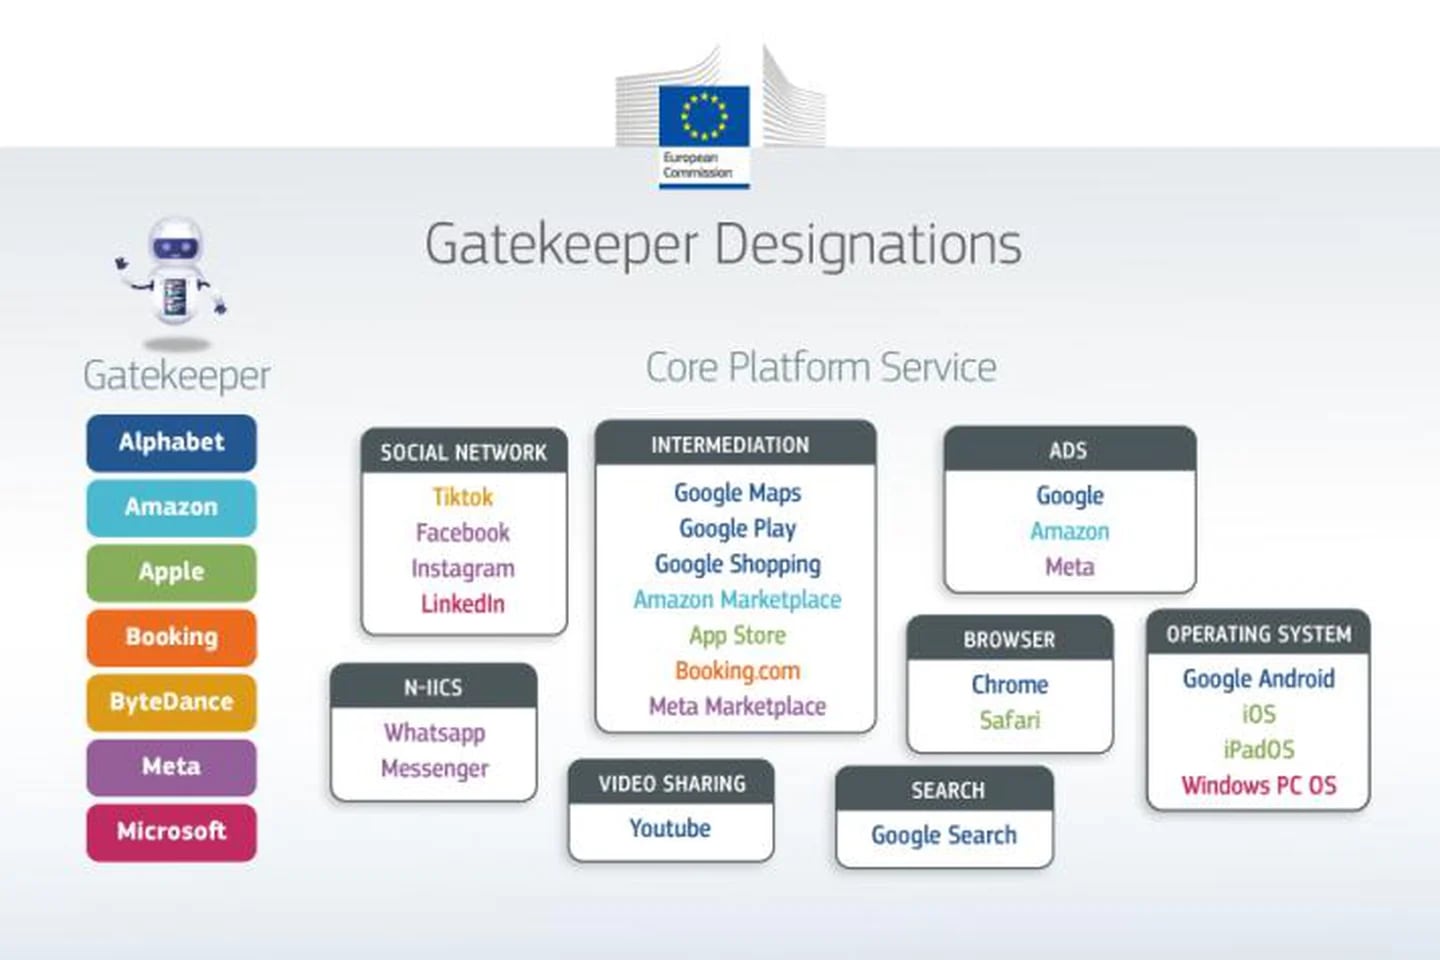 Digital gatekeepers are classified according to the products or services they offer